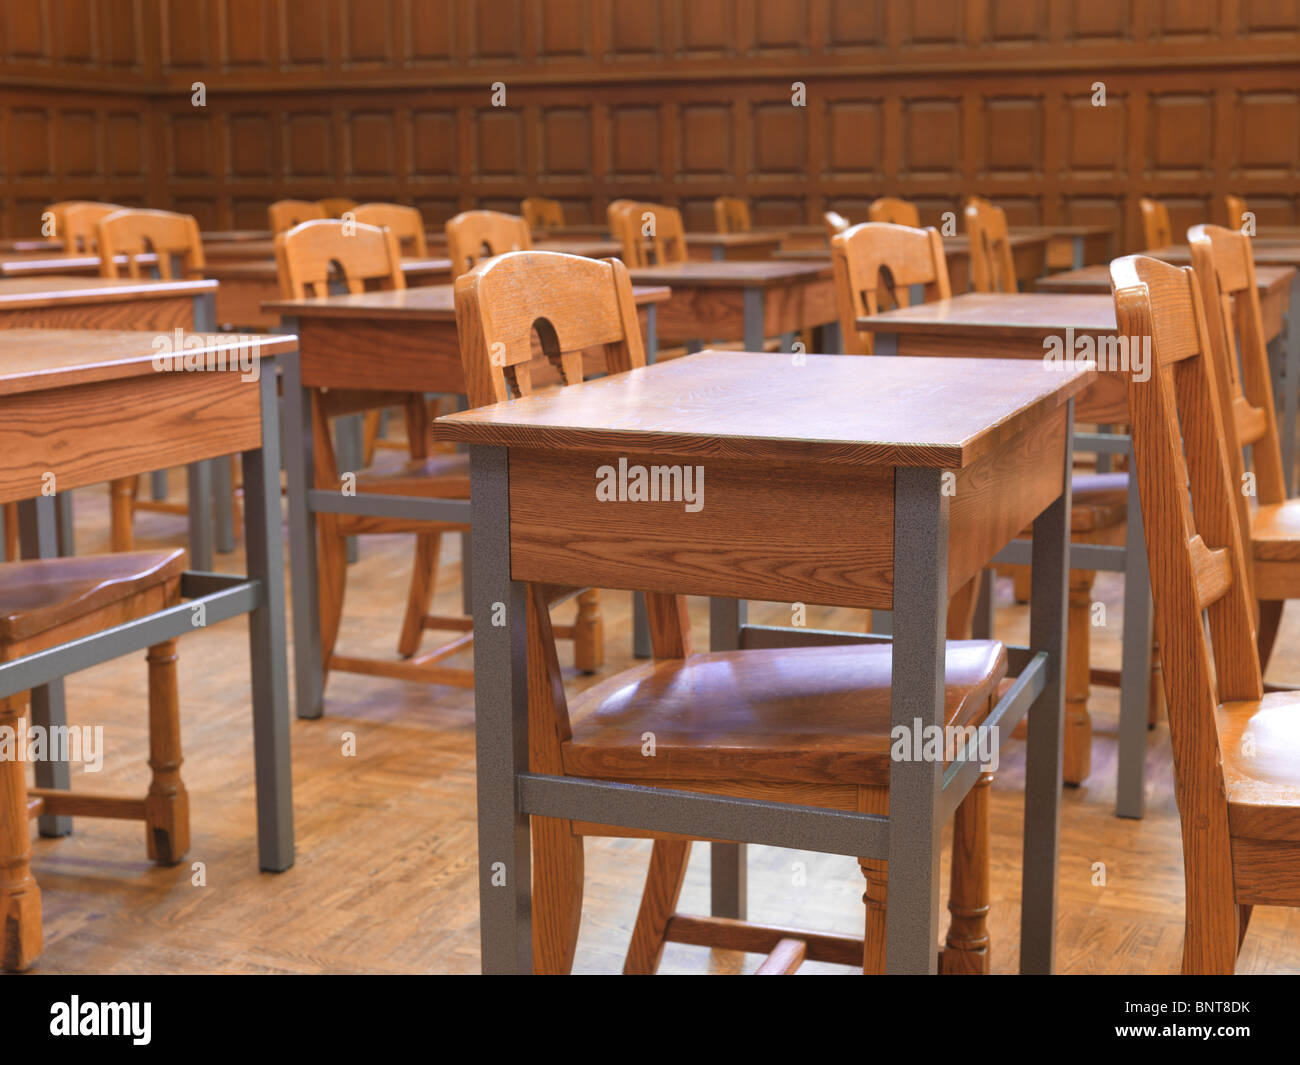 Desks at a lecture hall. University of Toronto, Canada. Stock Photo